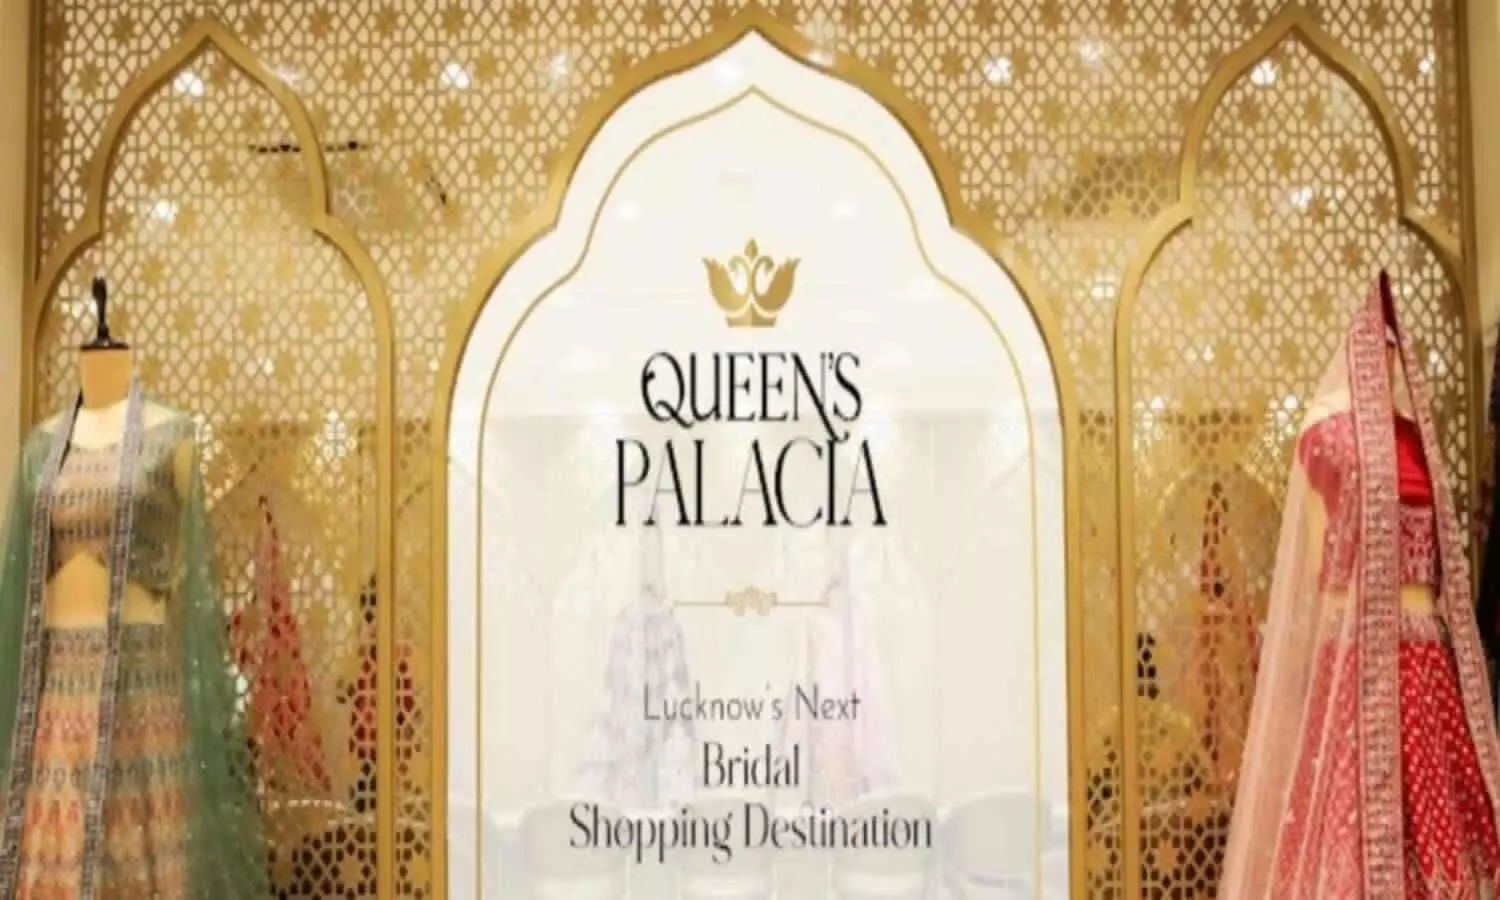 Best Festive and Bridal Collection at Queen Palacia